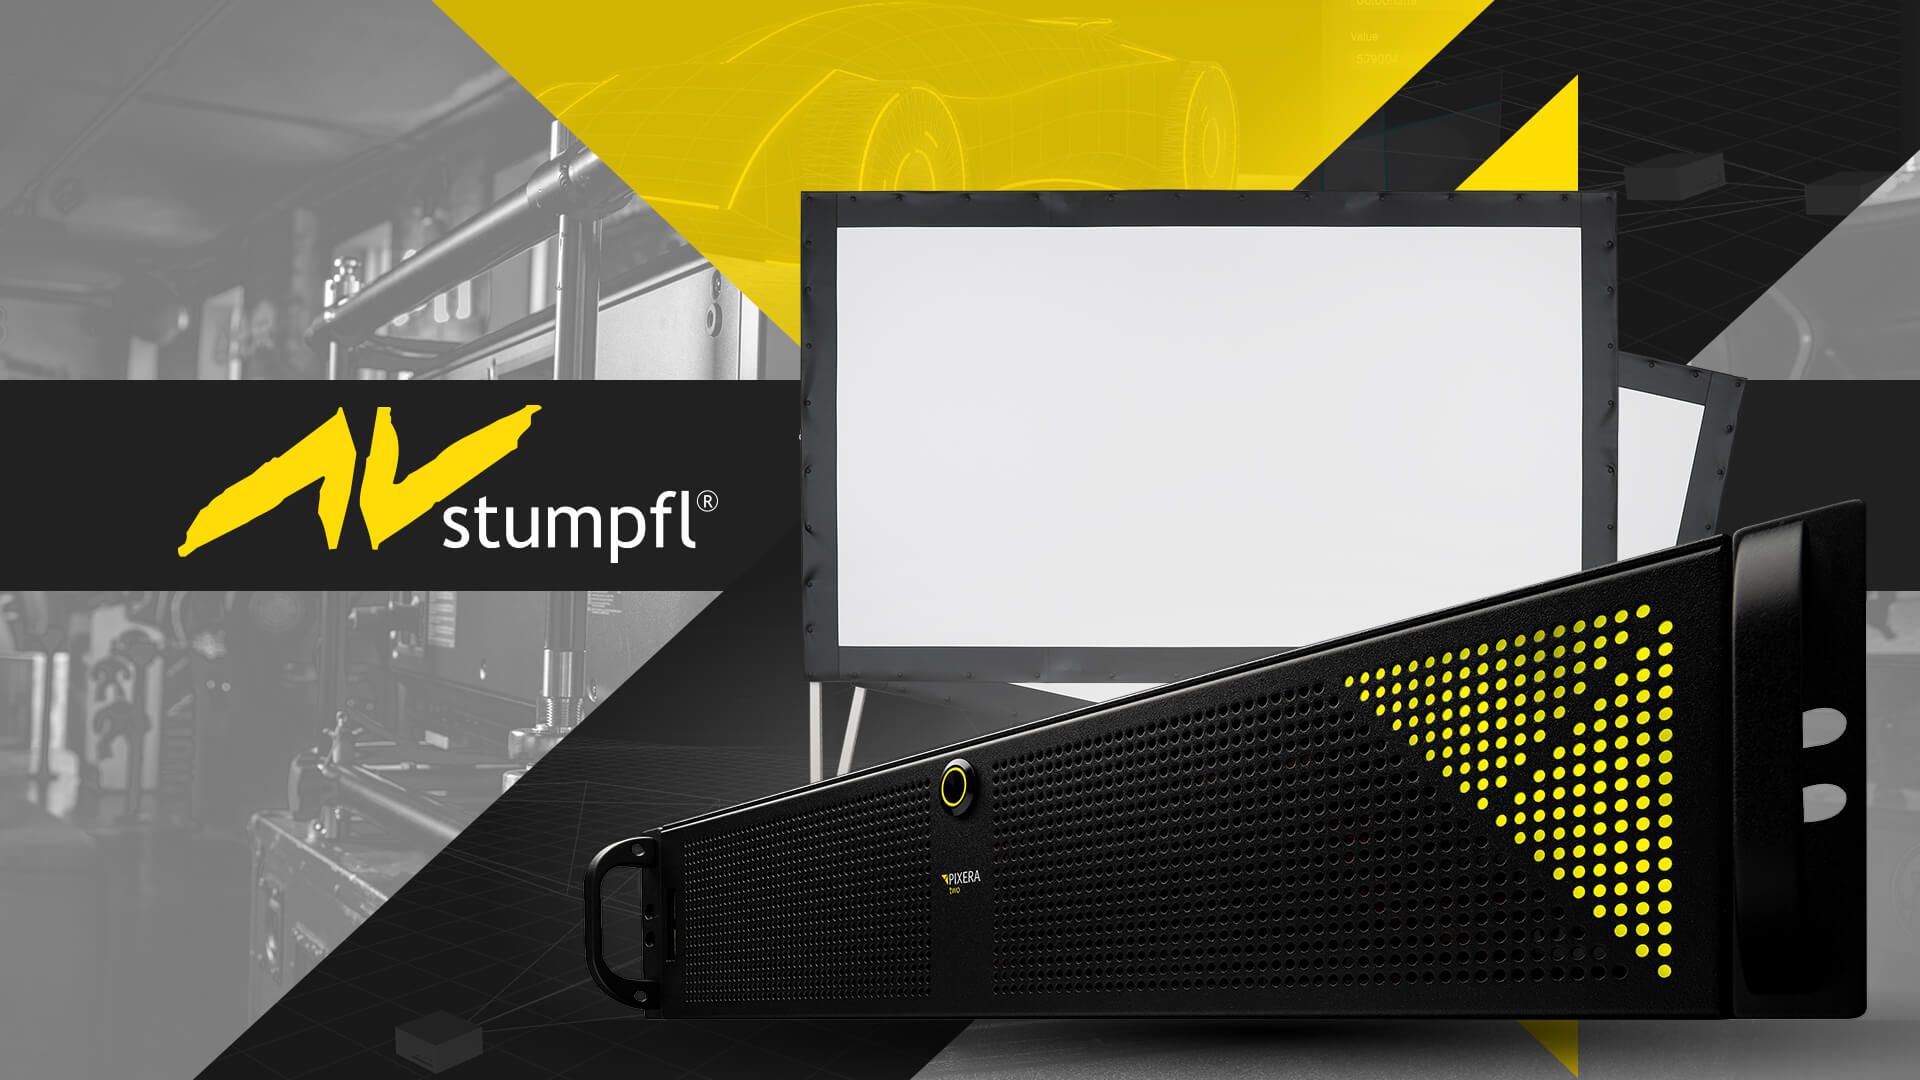 A black and yellow LED computer with the word n smupt on it.